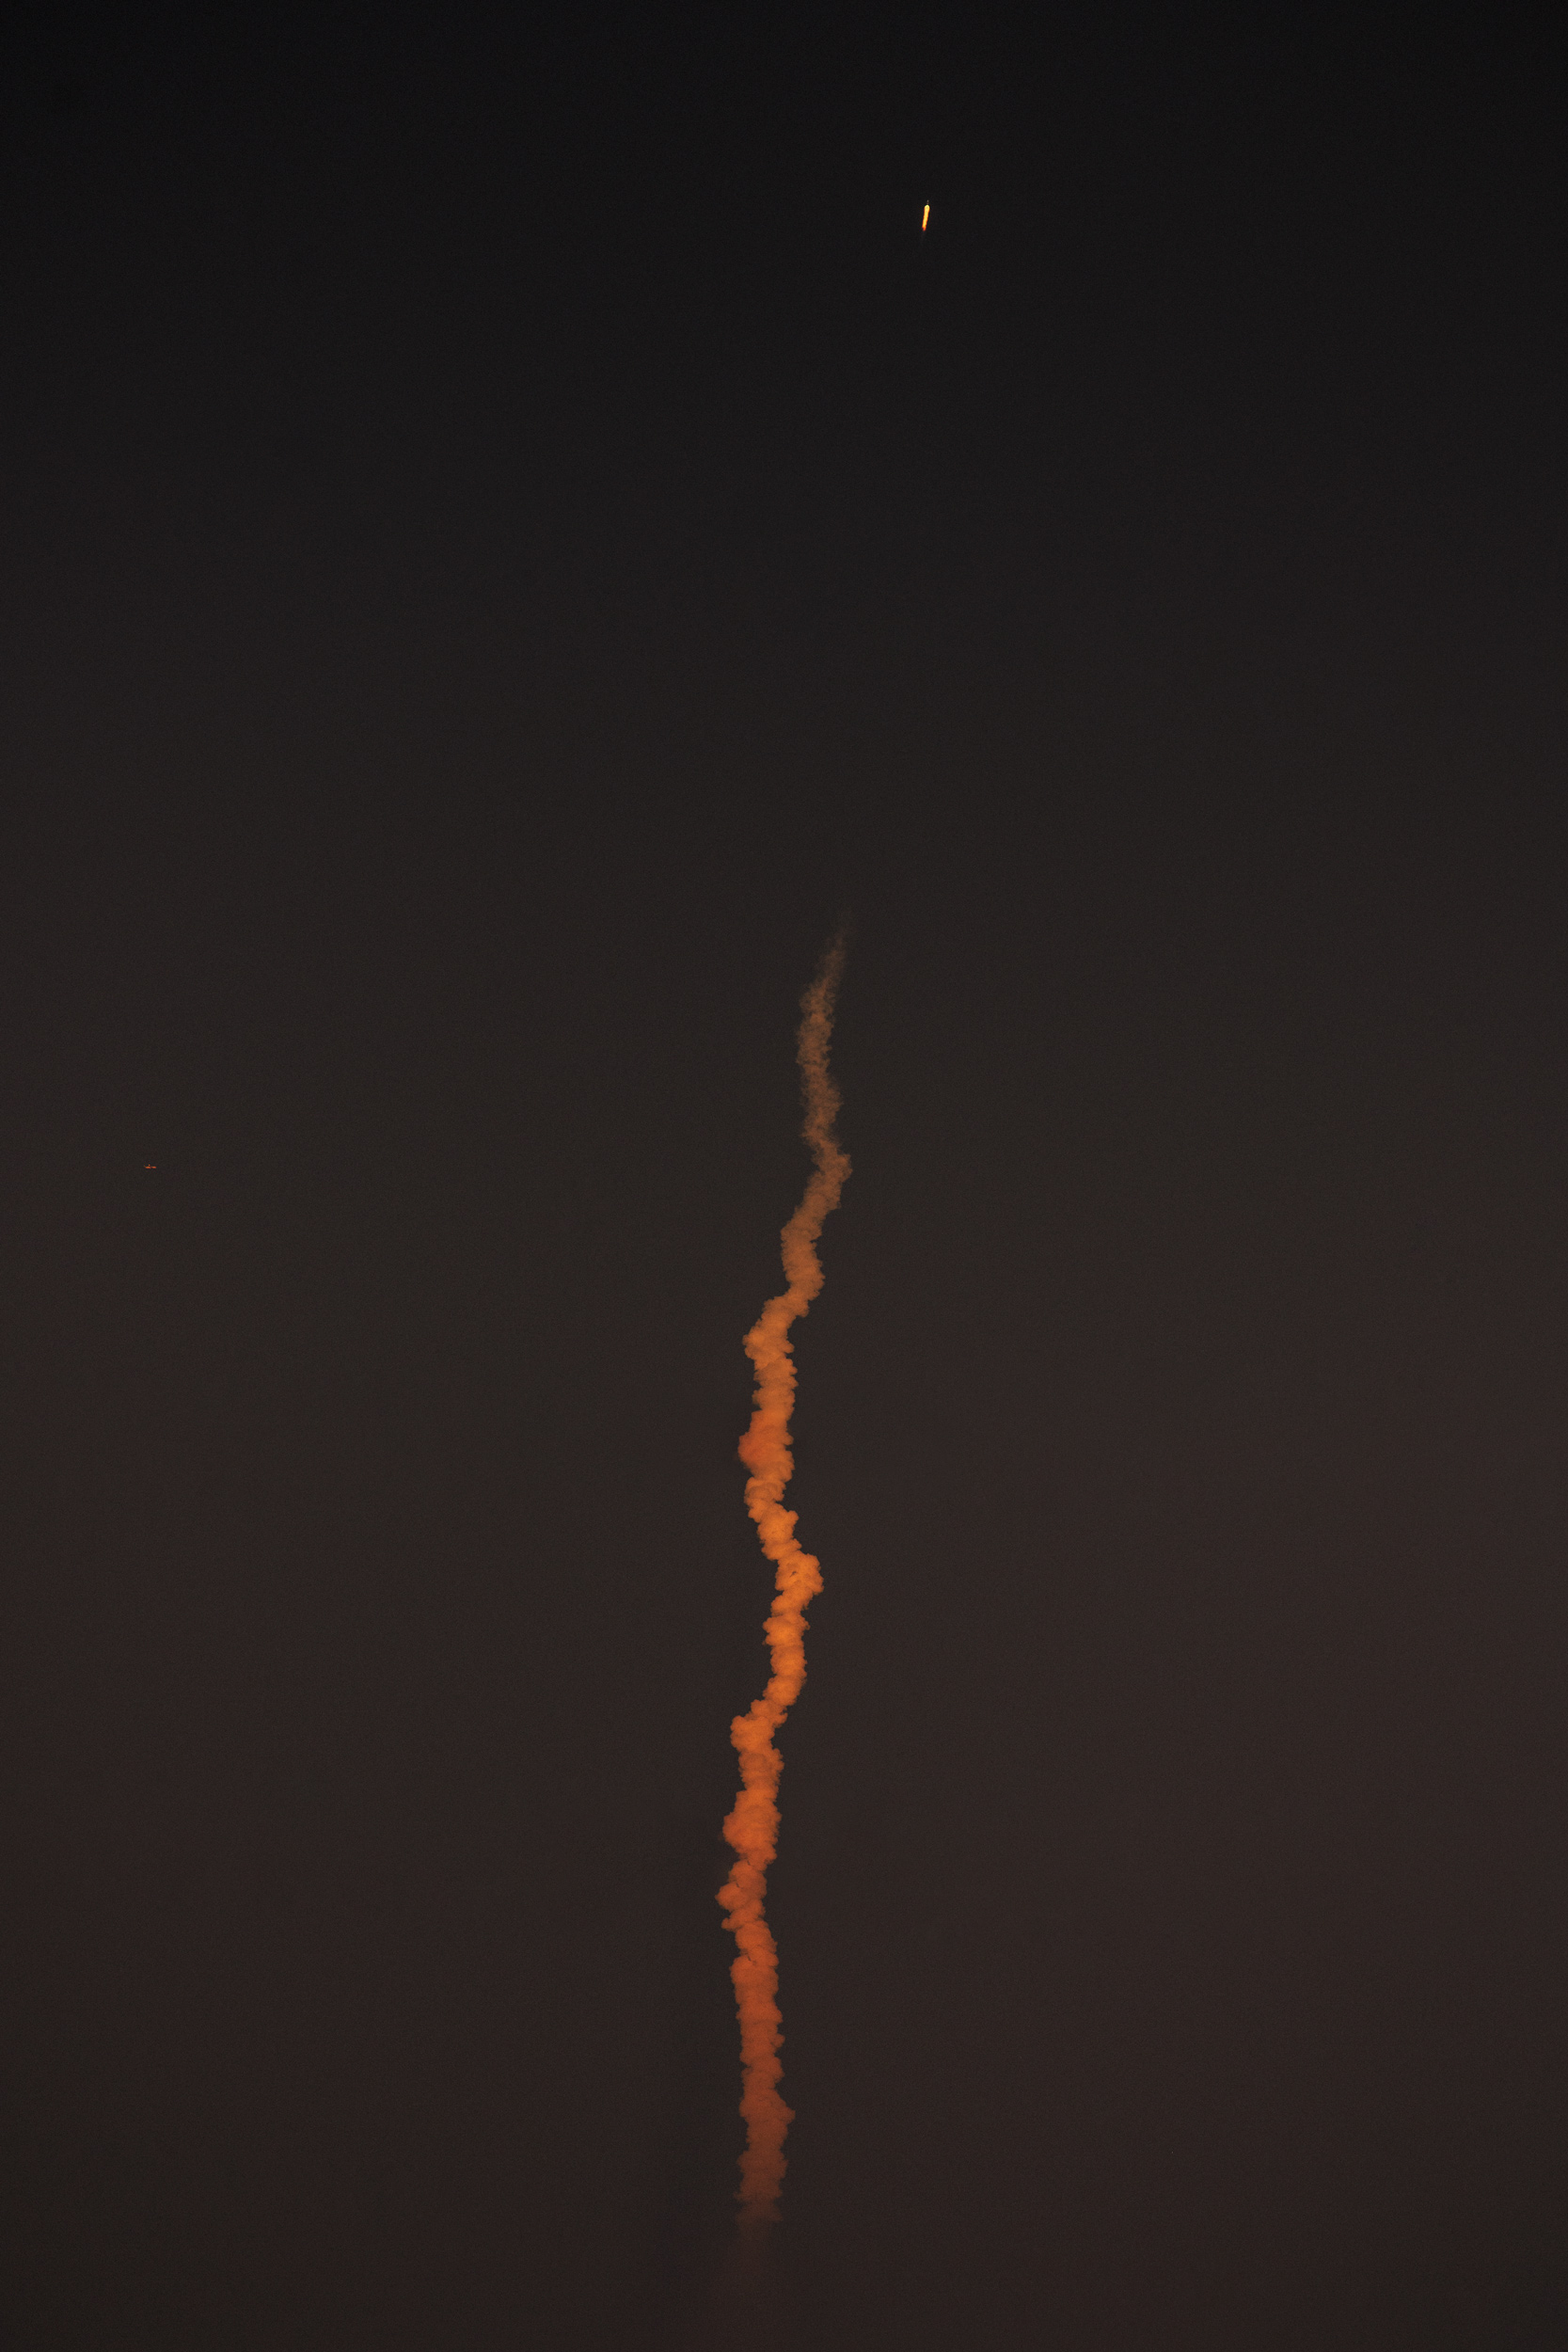 spacex_launch_backyard_100822_lowres_LEE0066web